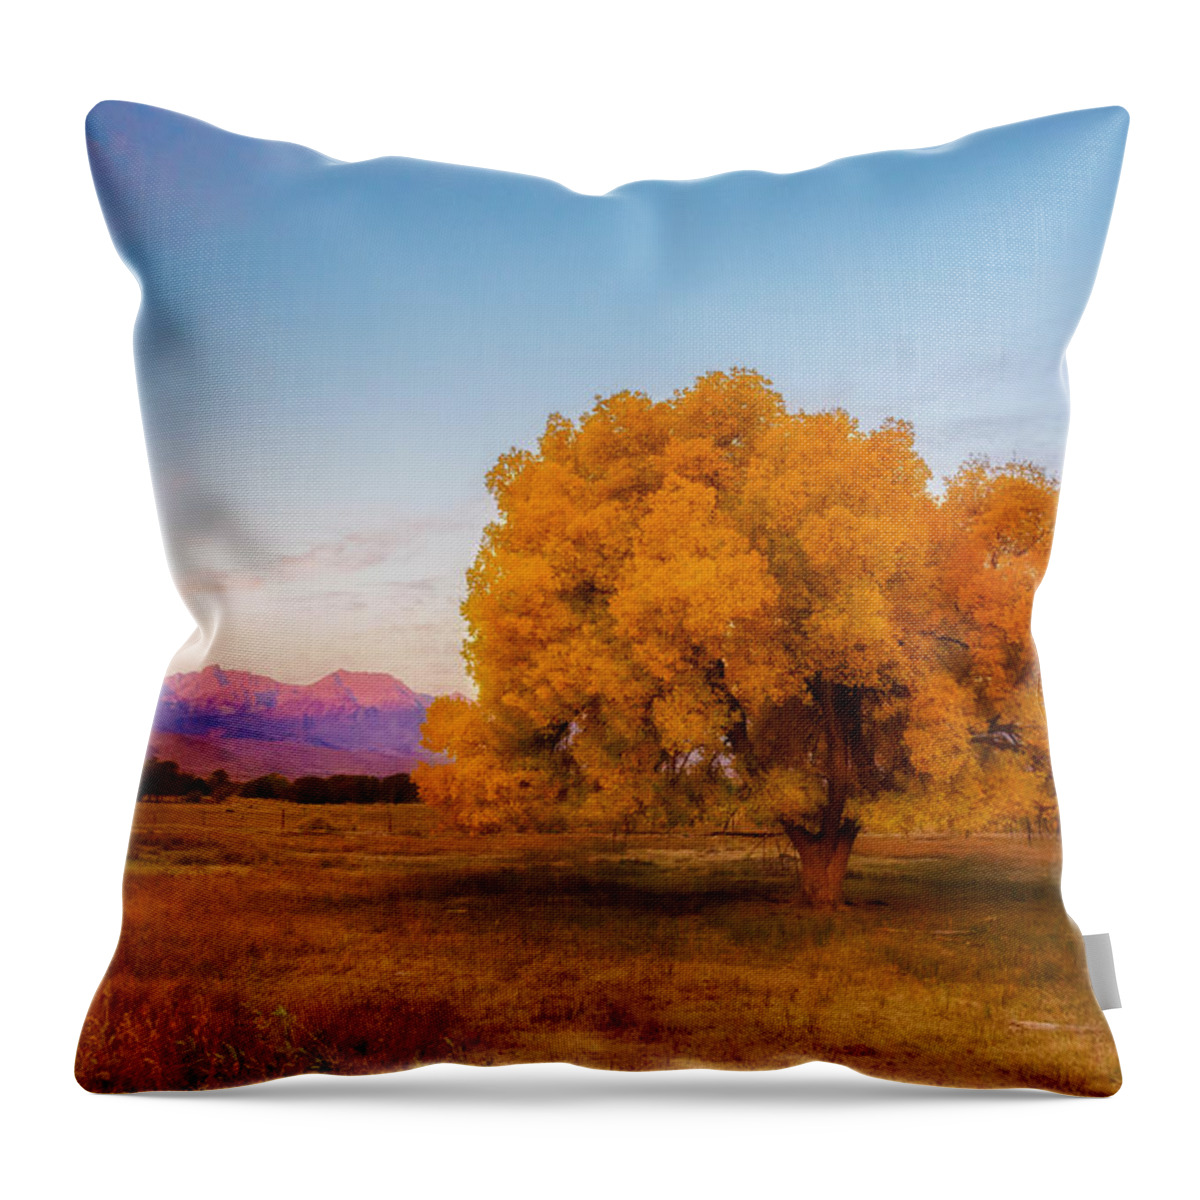 Landscape Throw Pillow featuring the photograph Bishop Sunrise by Tassanee Angiolillo